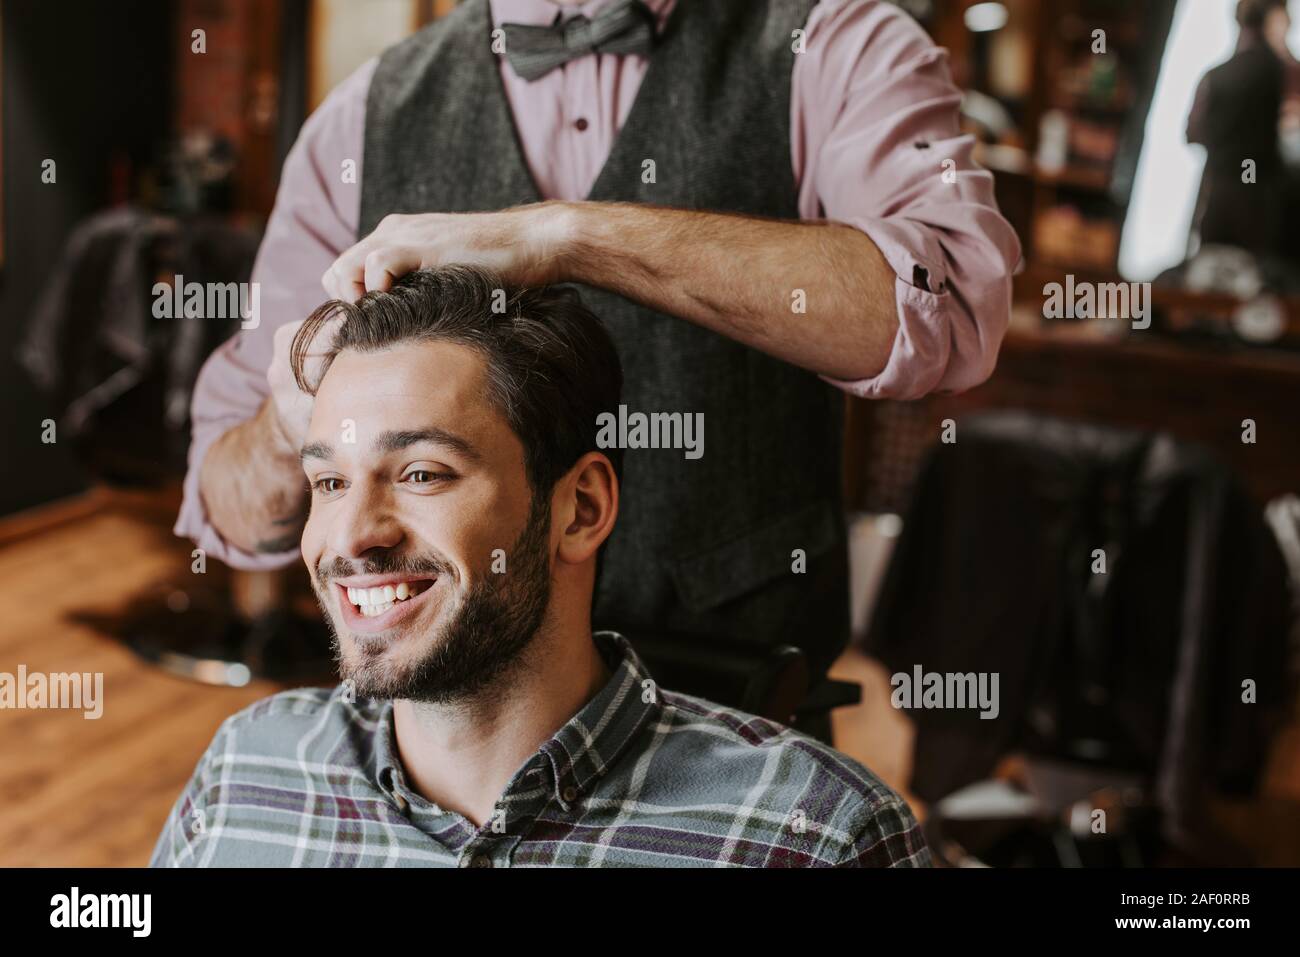 barber styling hair on cheerful bearded man Stock Photo